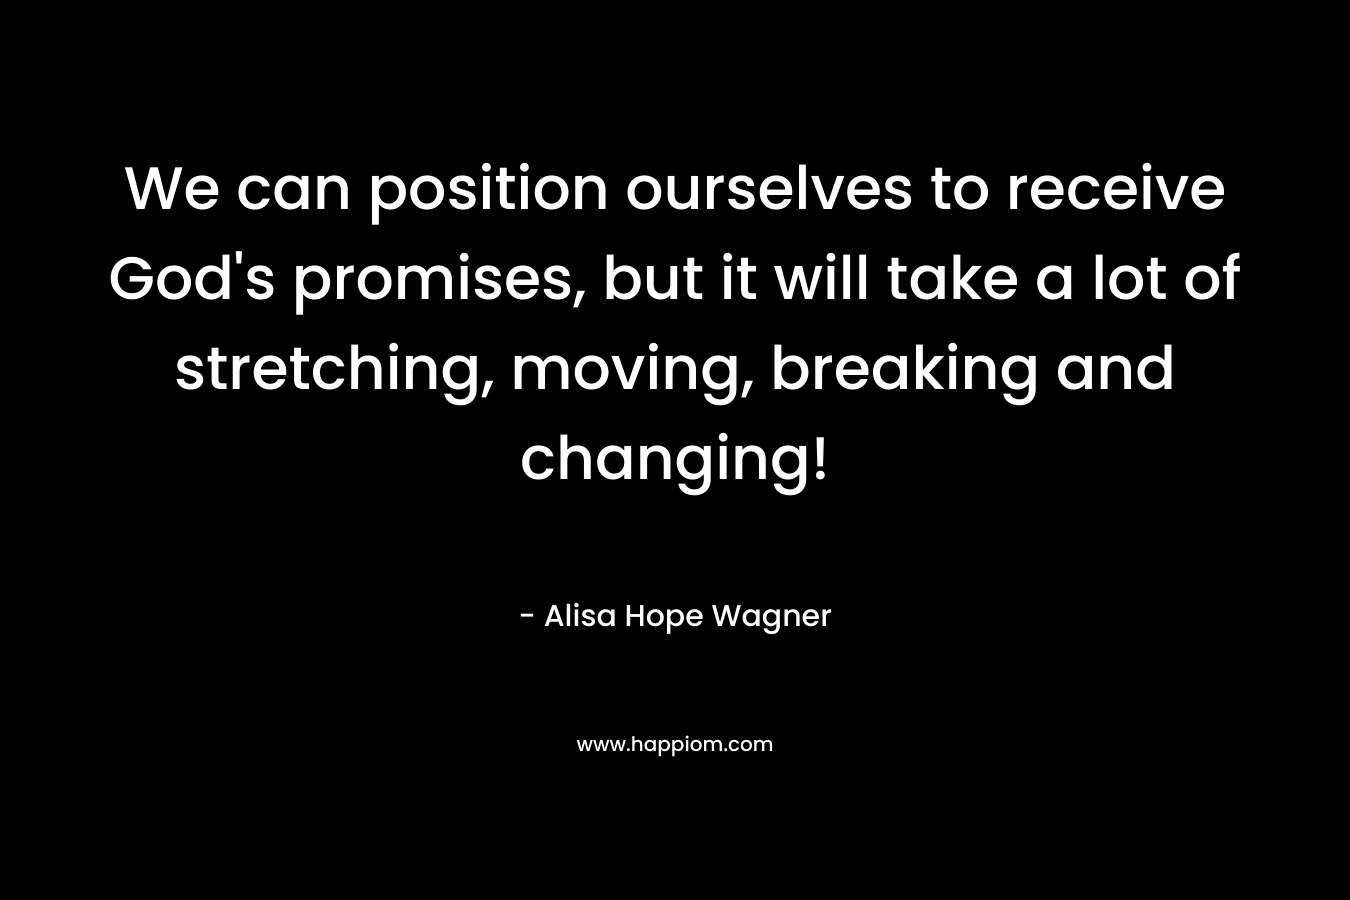 We can position ourselves to receive God's promises, but it will take a lot of stretching, moving, breaking and changing!